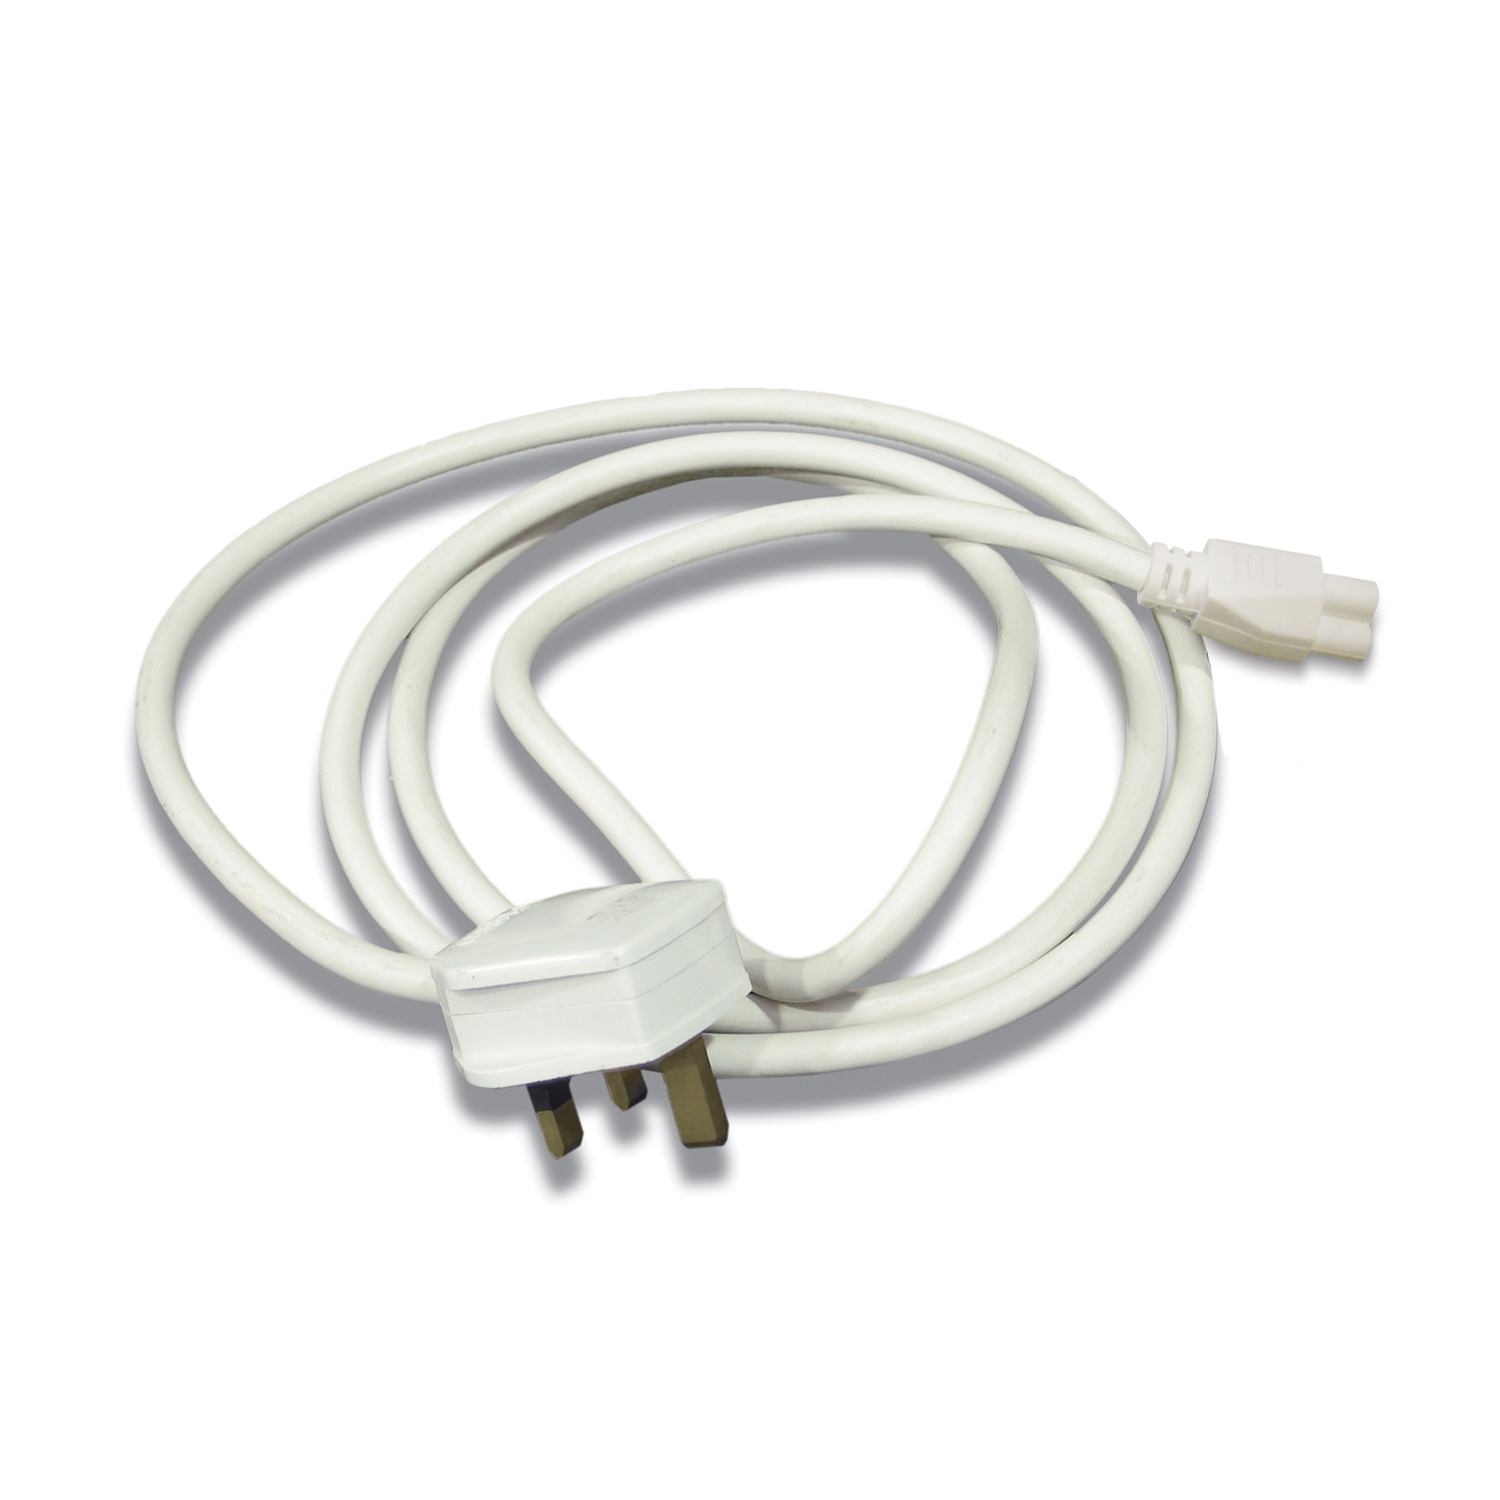 Cable connector and plug (UK)